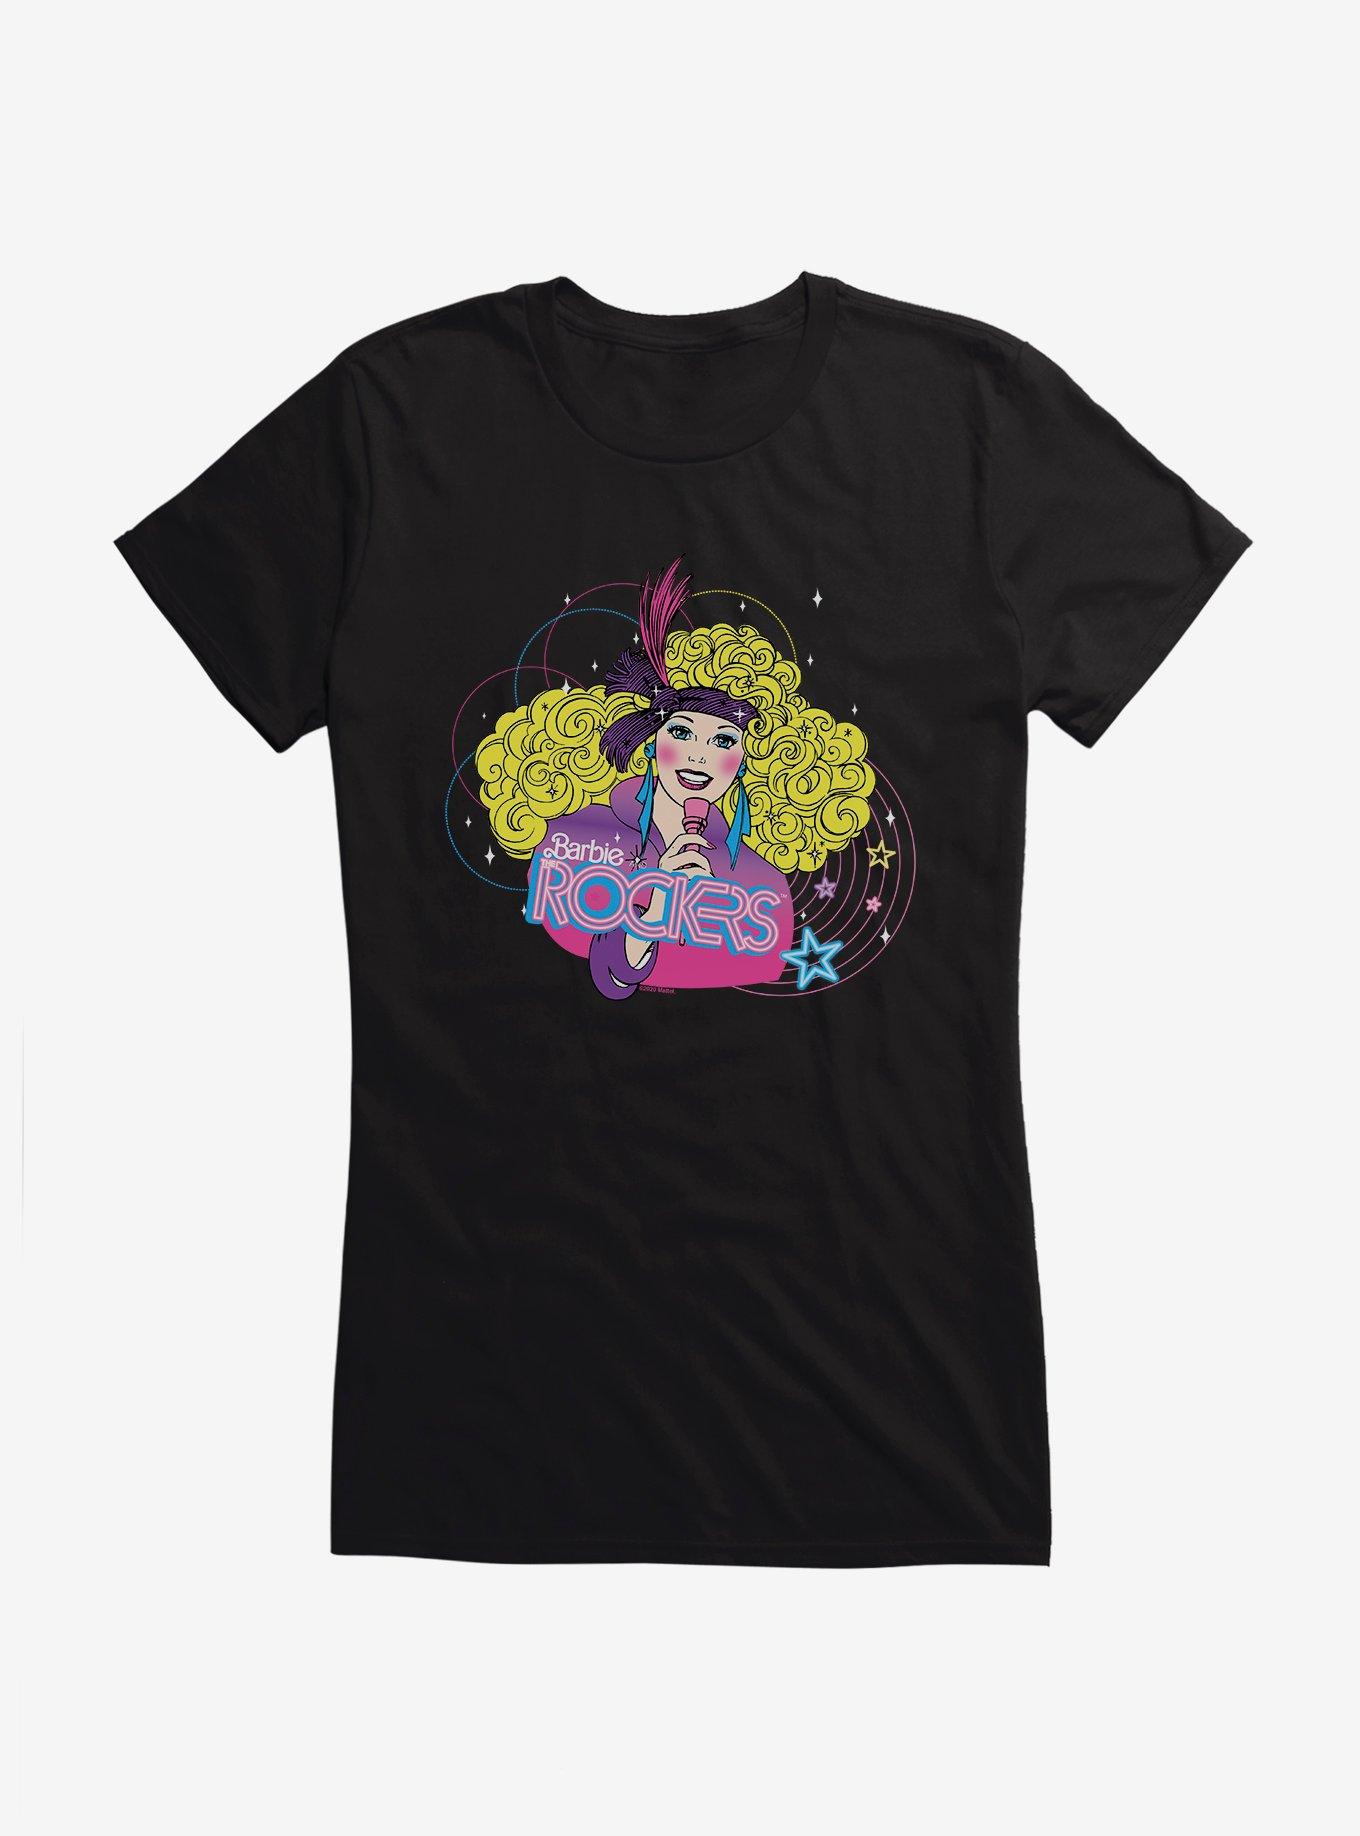 Barbie And The Rockers Girls T-Shirt